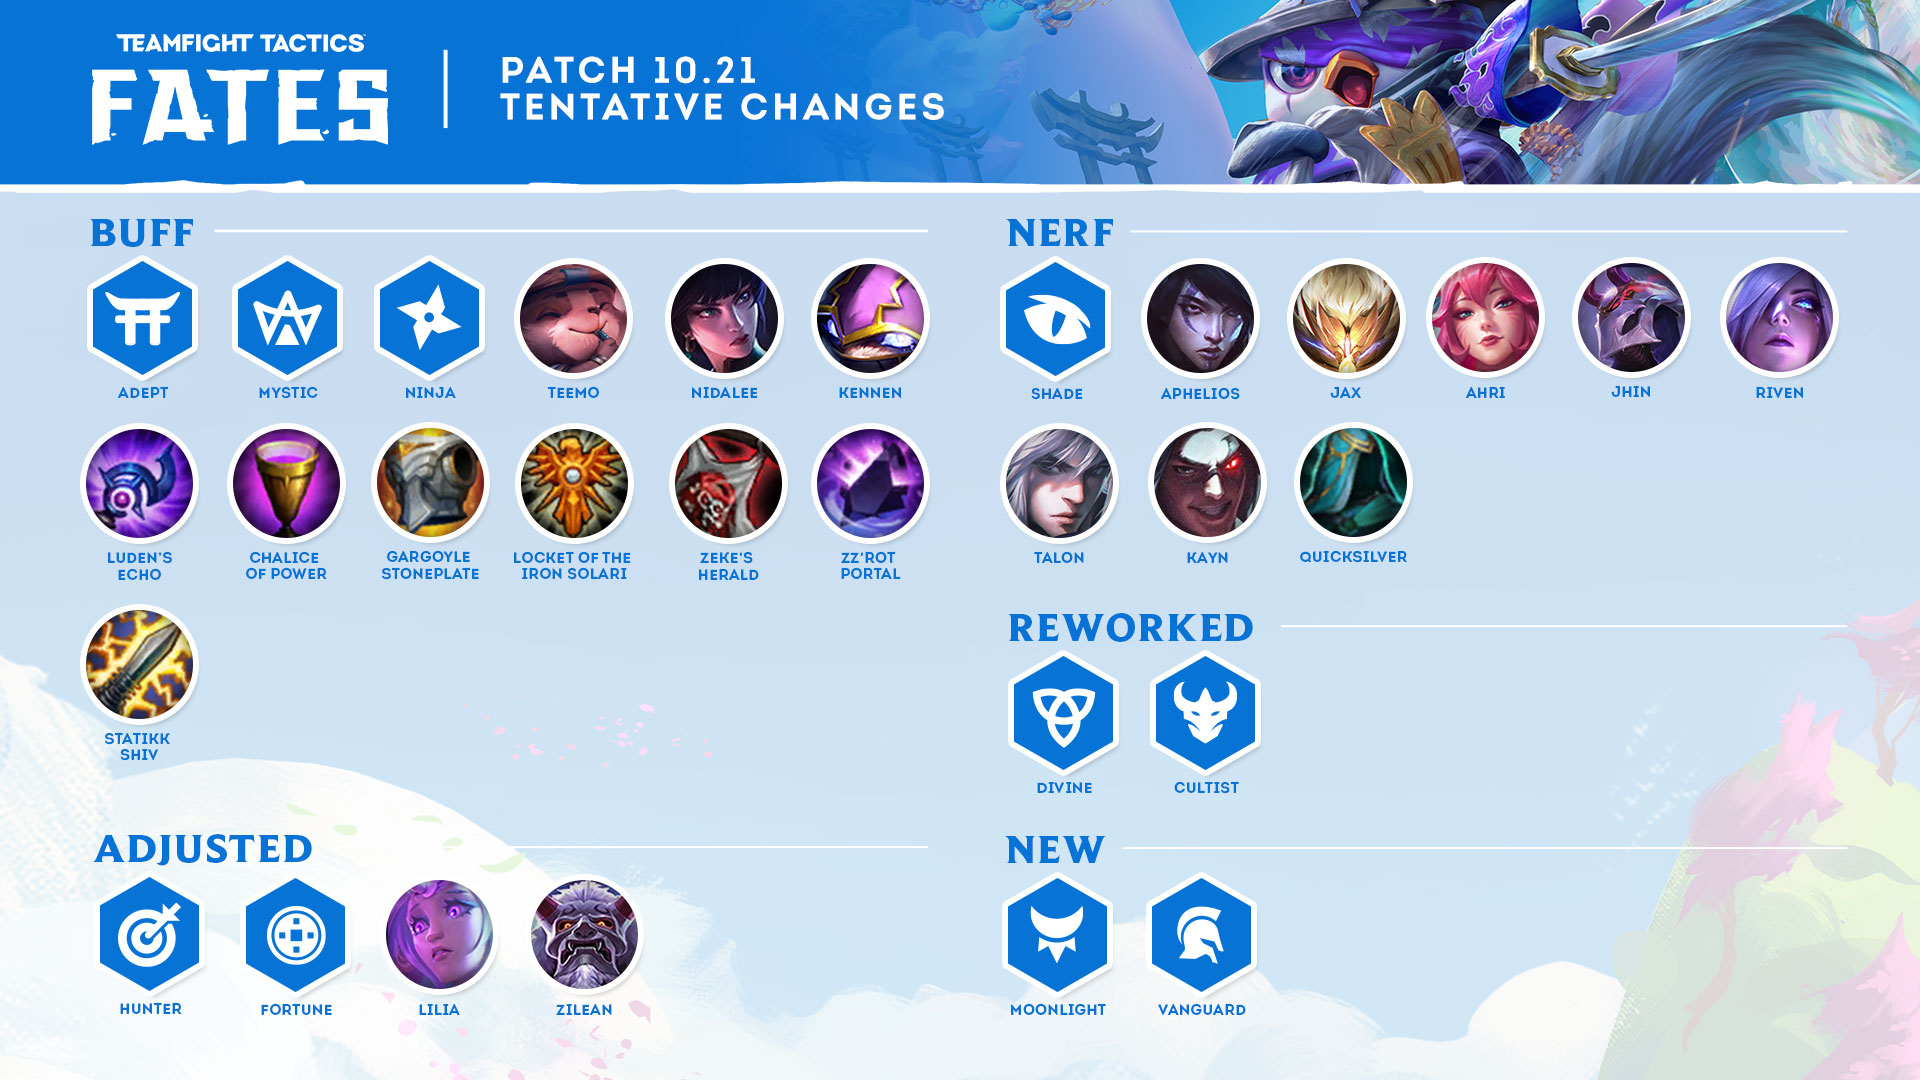 TFT New Set 9.5 Update: Horizonbound Synergies, Champions, Items and New  Region Portals, Legends! 